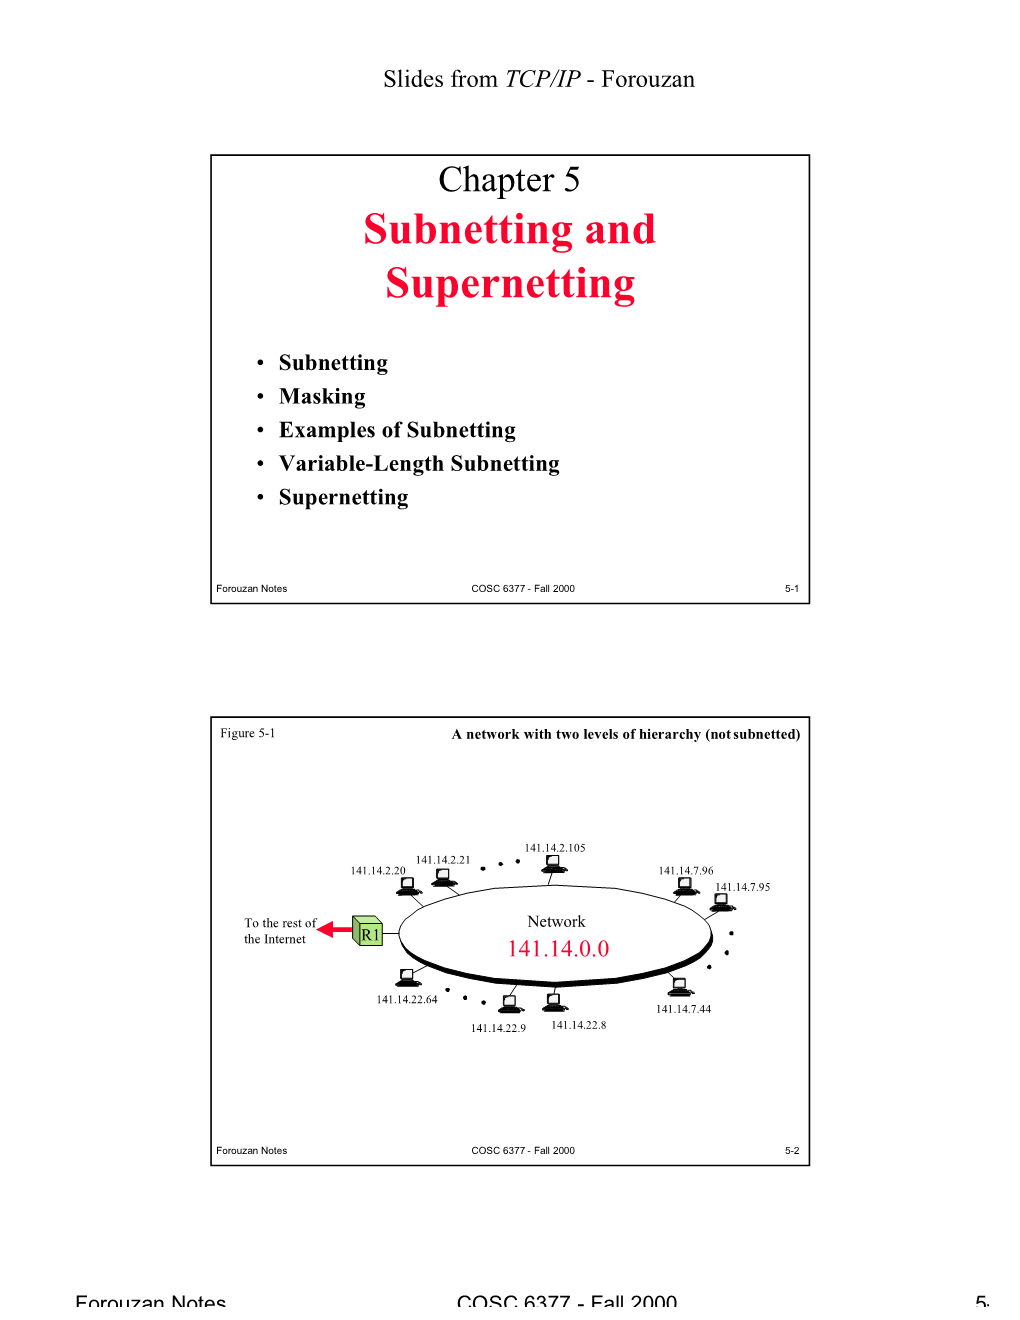 Chapter 5: Subnetting and Supernetting